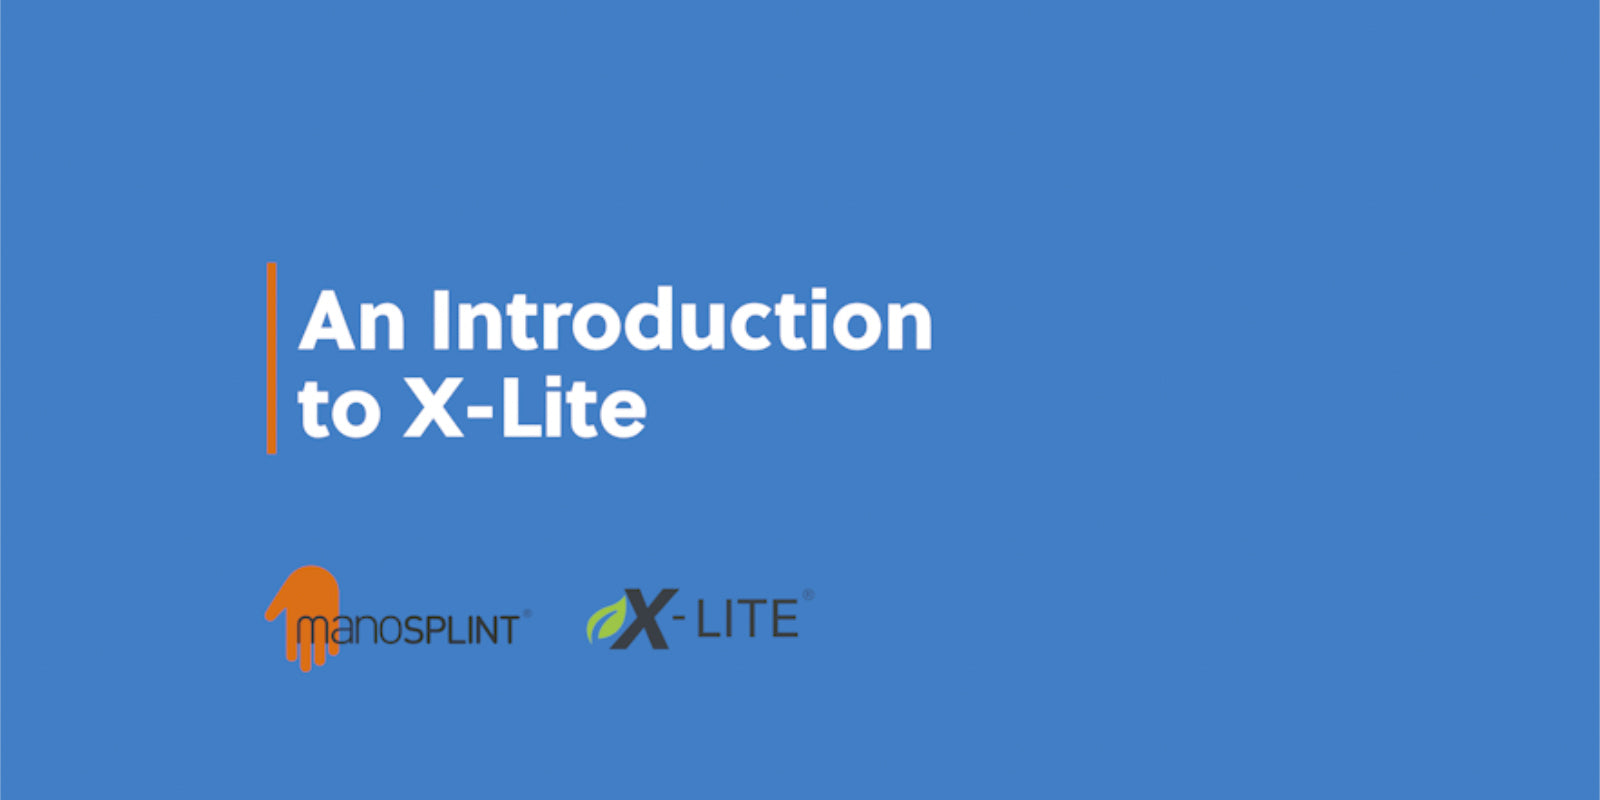 An Introduction to X-Lite